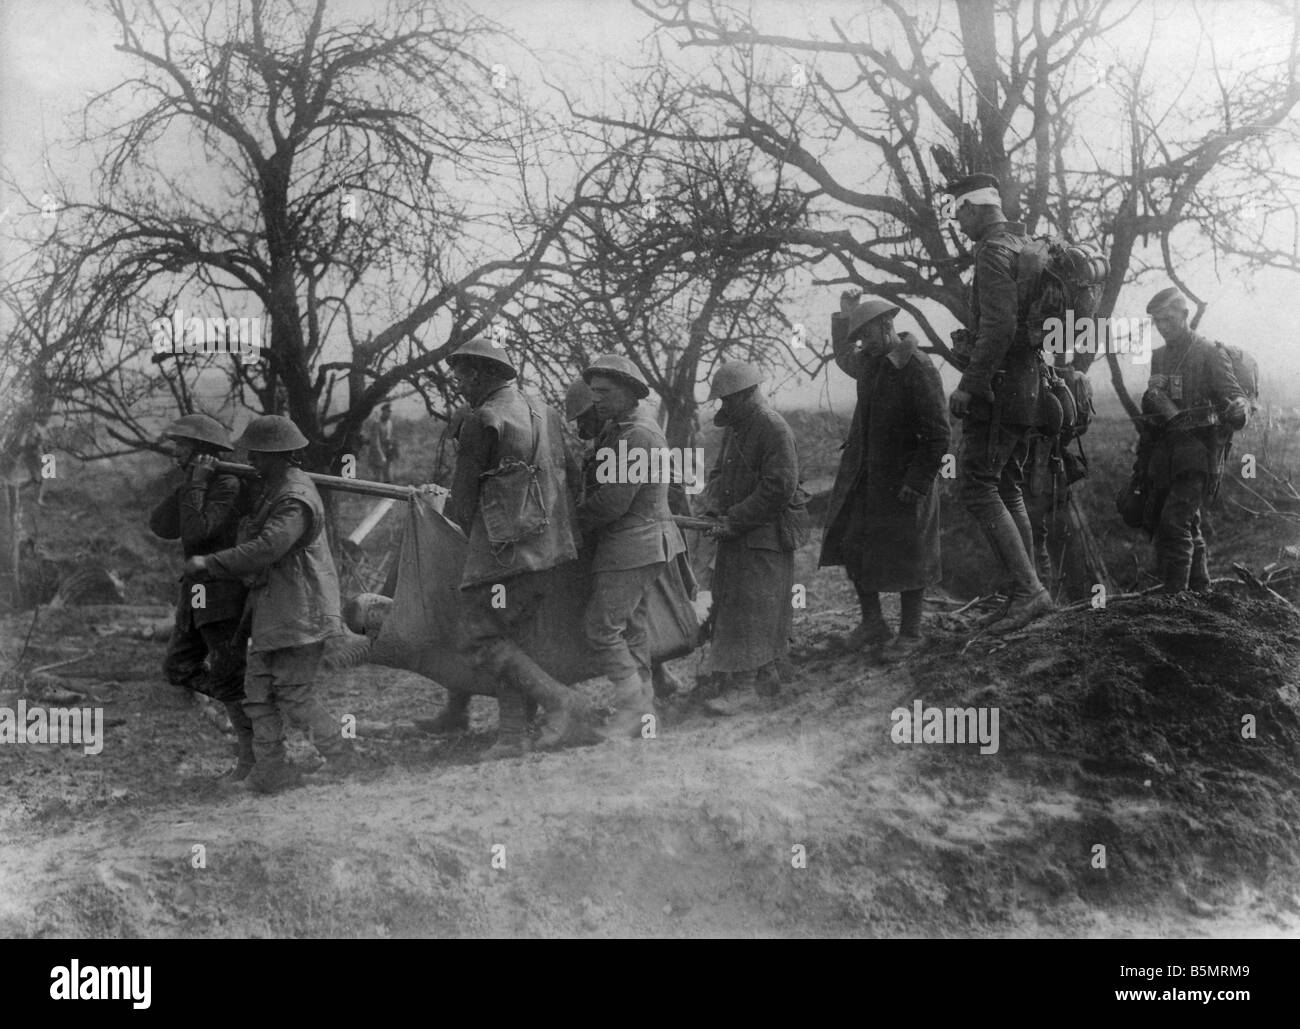 9 1918 3 21 A1 Fallen English sold West Fr March 1918 World War 1 Western Front German west major offensivee 21st March 5th Apri Stock Photo